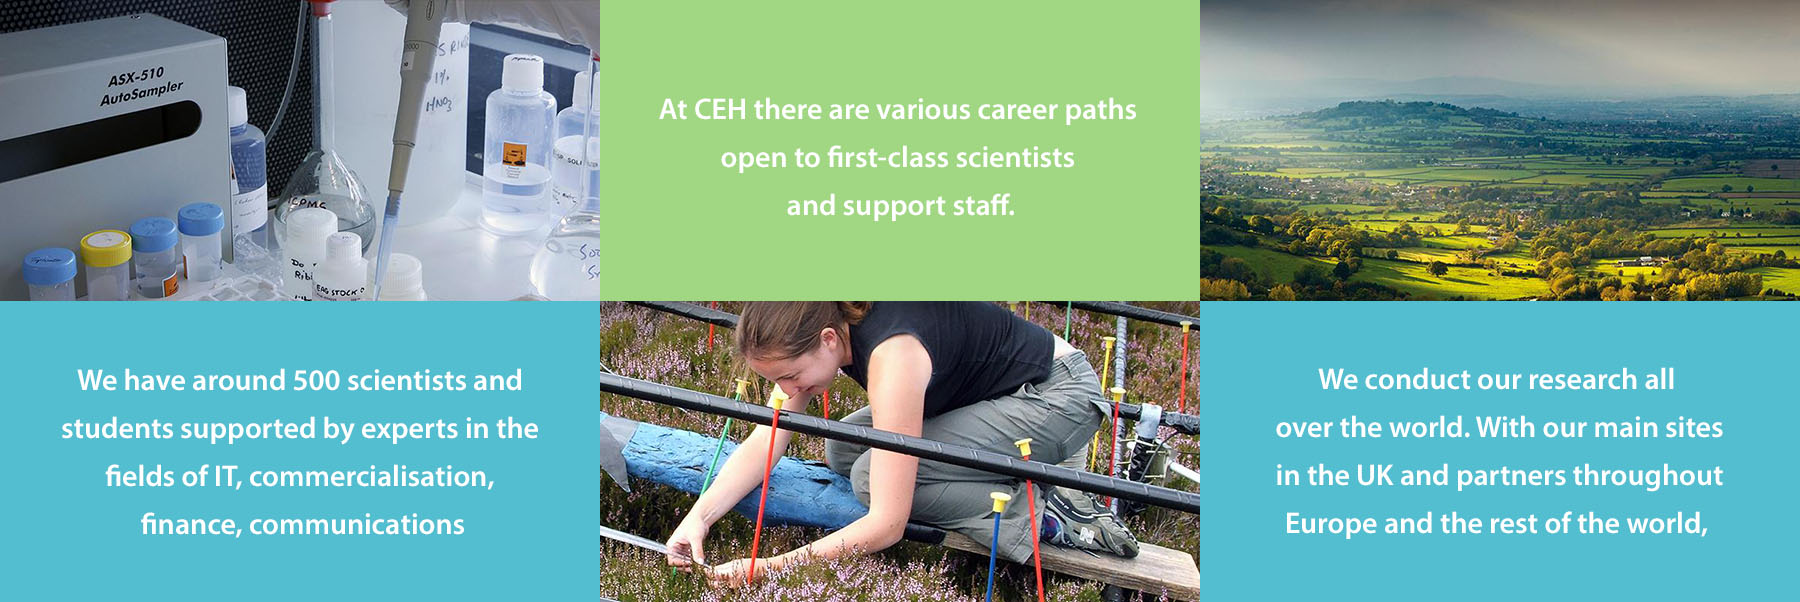 Centre For Ecology And Hydrology Jobsacuk 